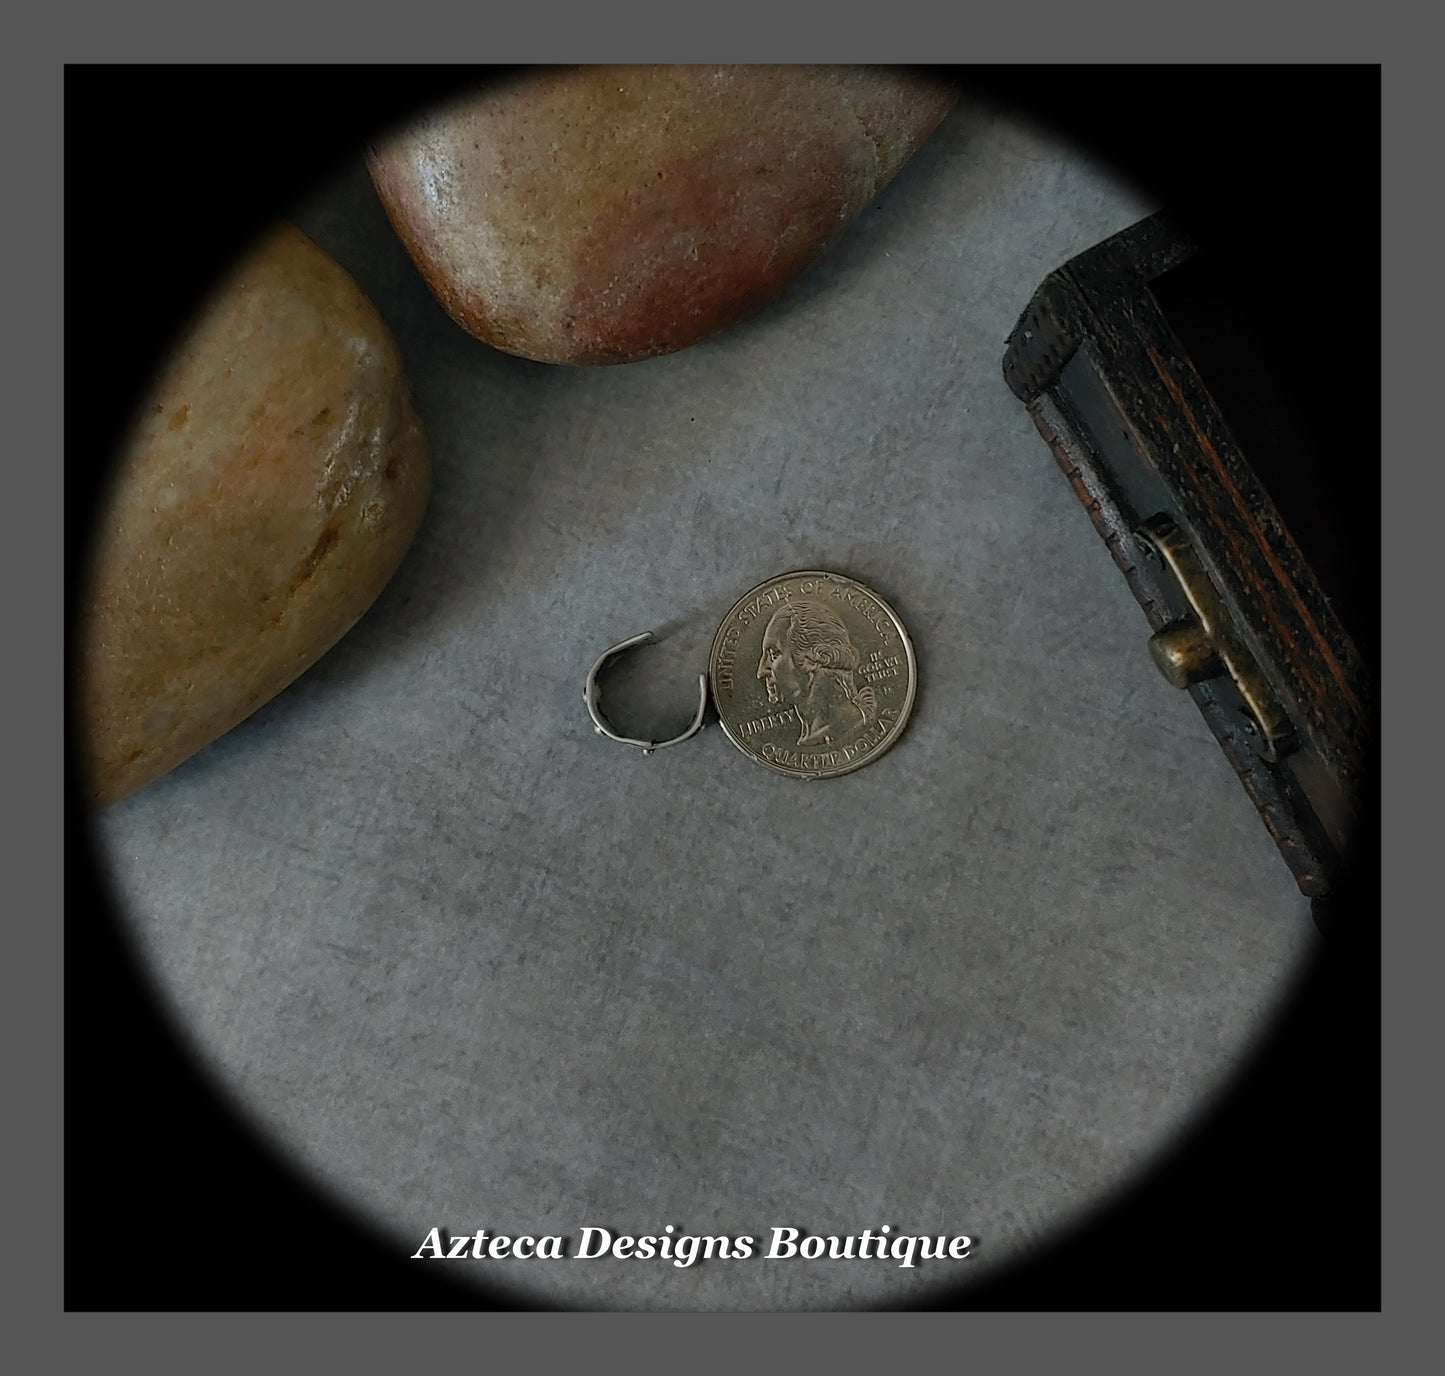 RUSTIC Raised Dot Ear Cuff + Argentium Silver + Hand Fabricated + Standard Size